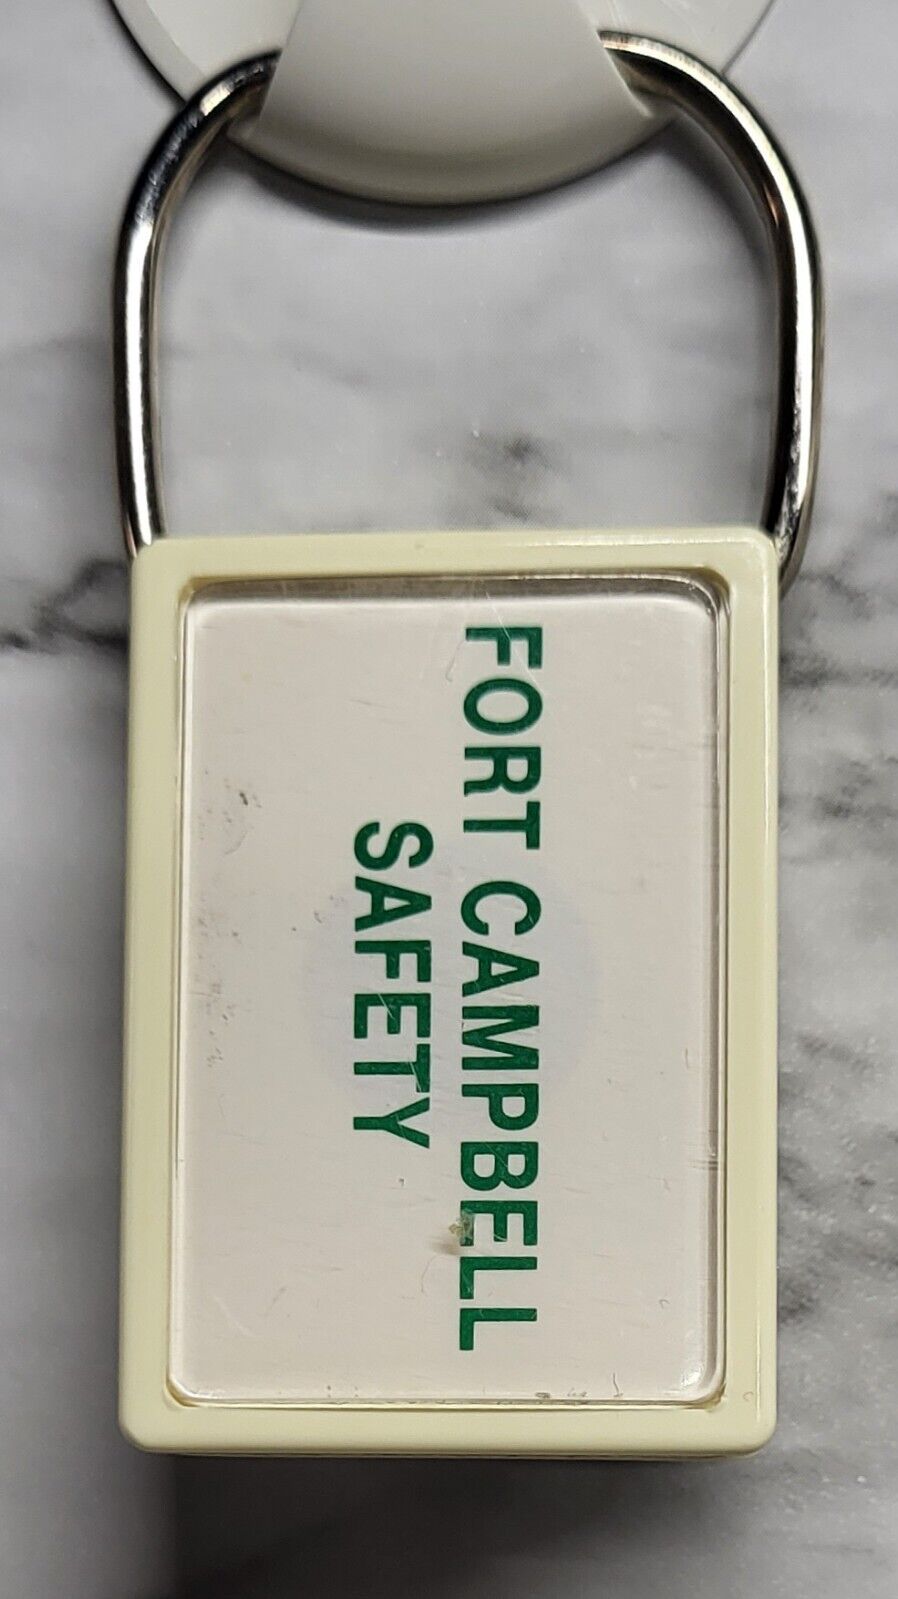 Fort Campbell Safety Keychain. Chart For Alcohol Consumption. Removable Loop.